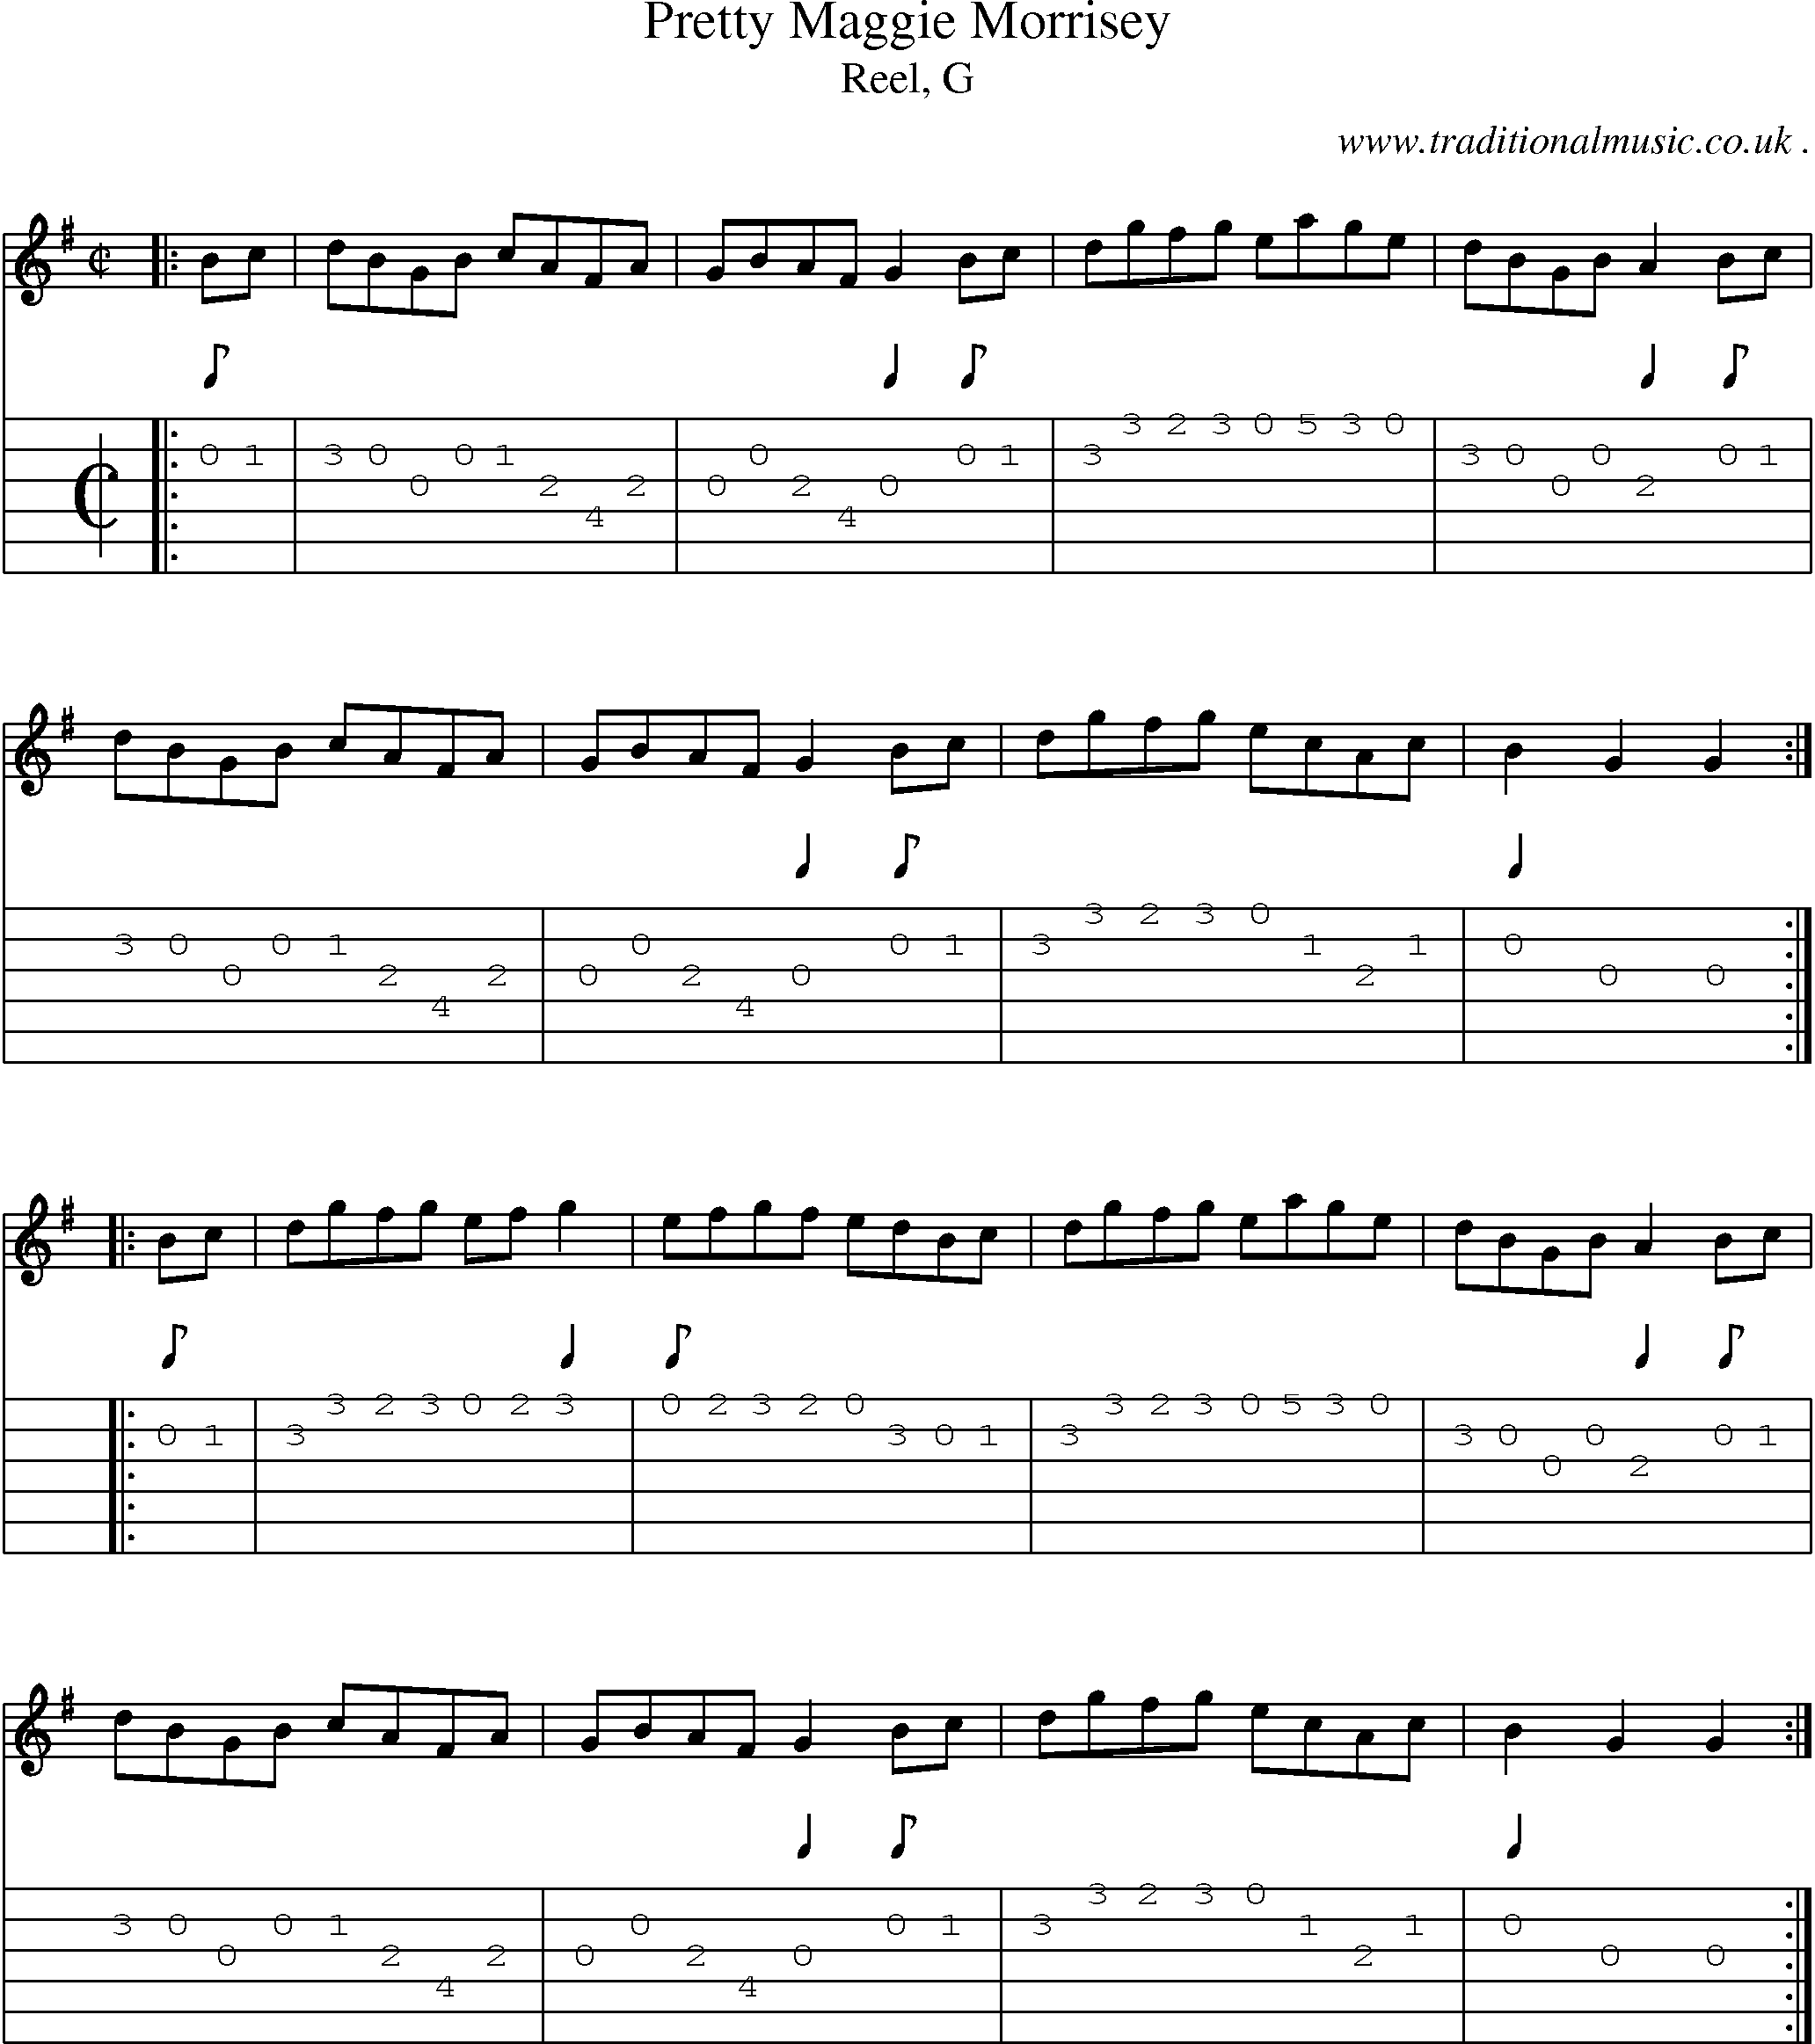 Sheet-music  score, Chords and Guitar Tabs for Pretty Maggie Morrisey